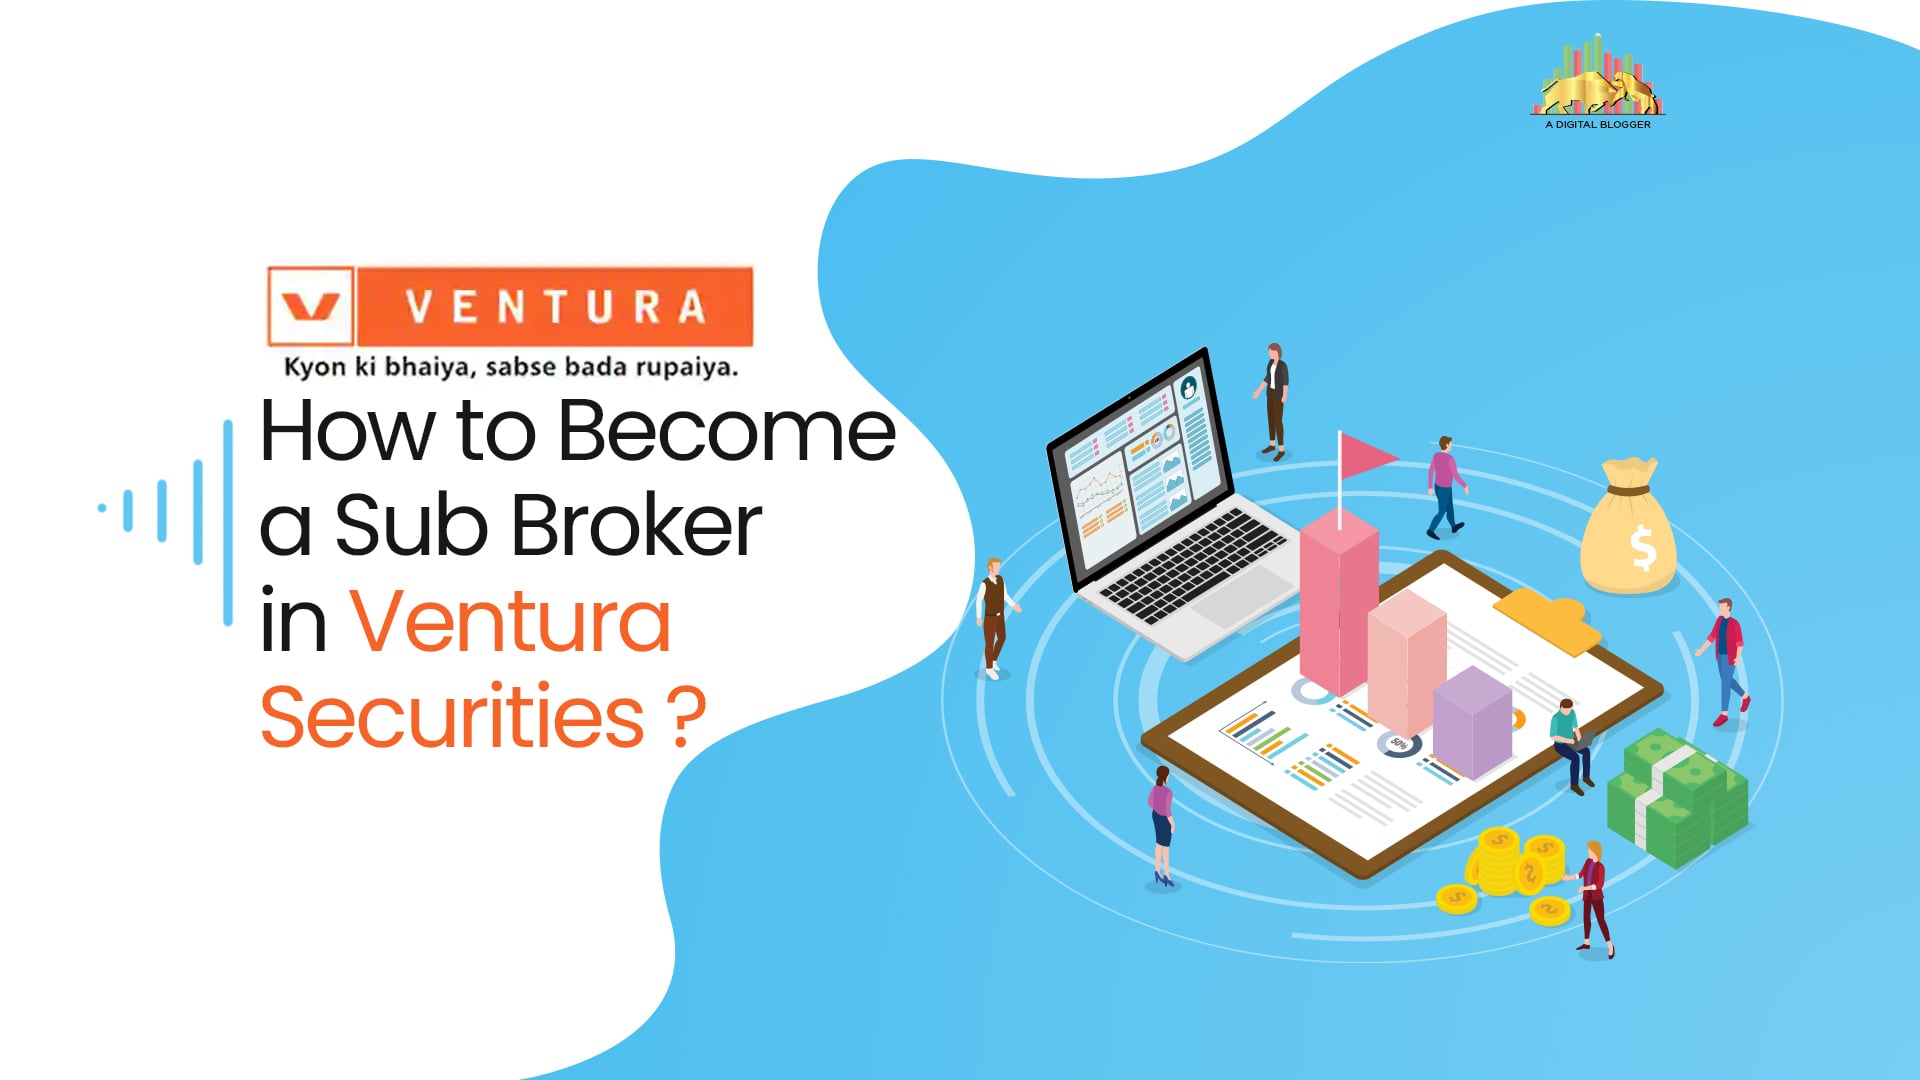 How to Become a Sub Broker in Ventura Securities?